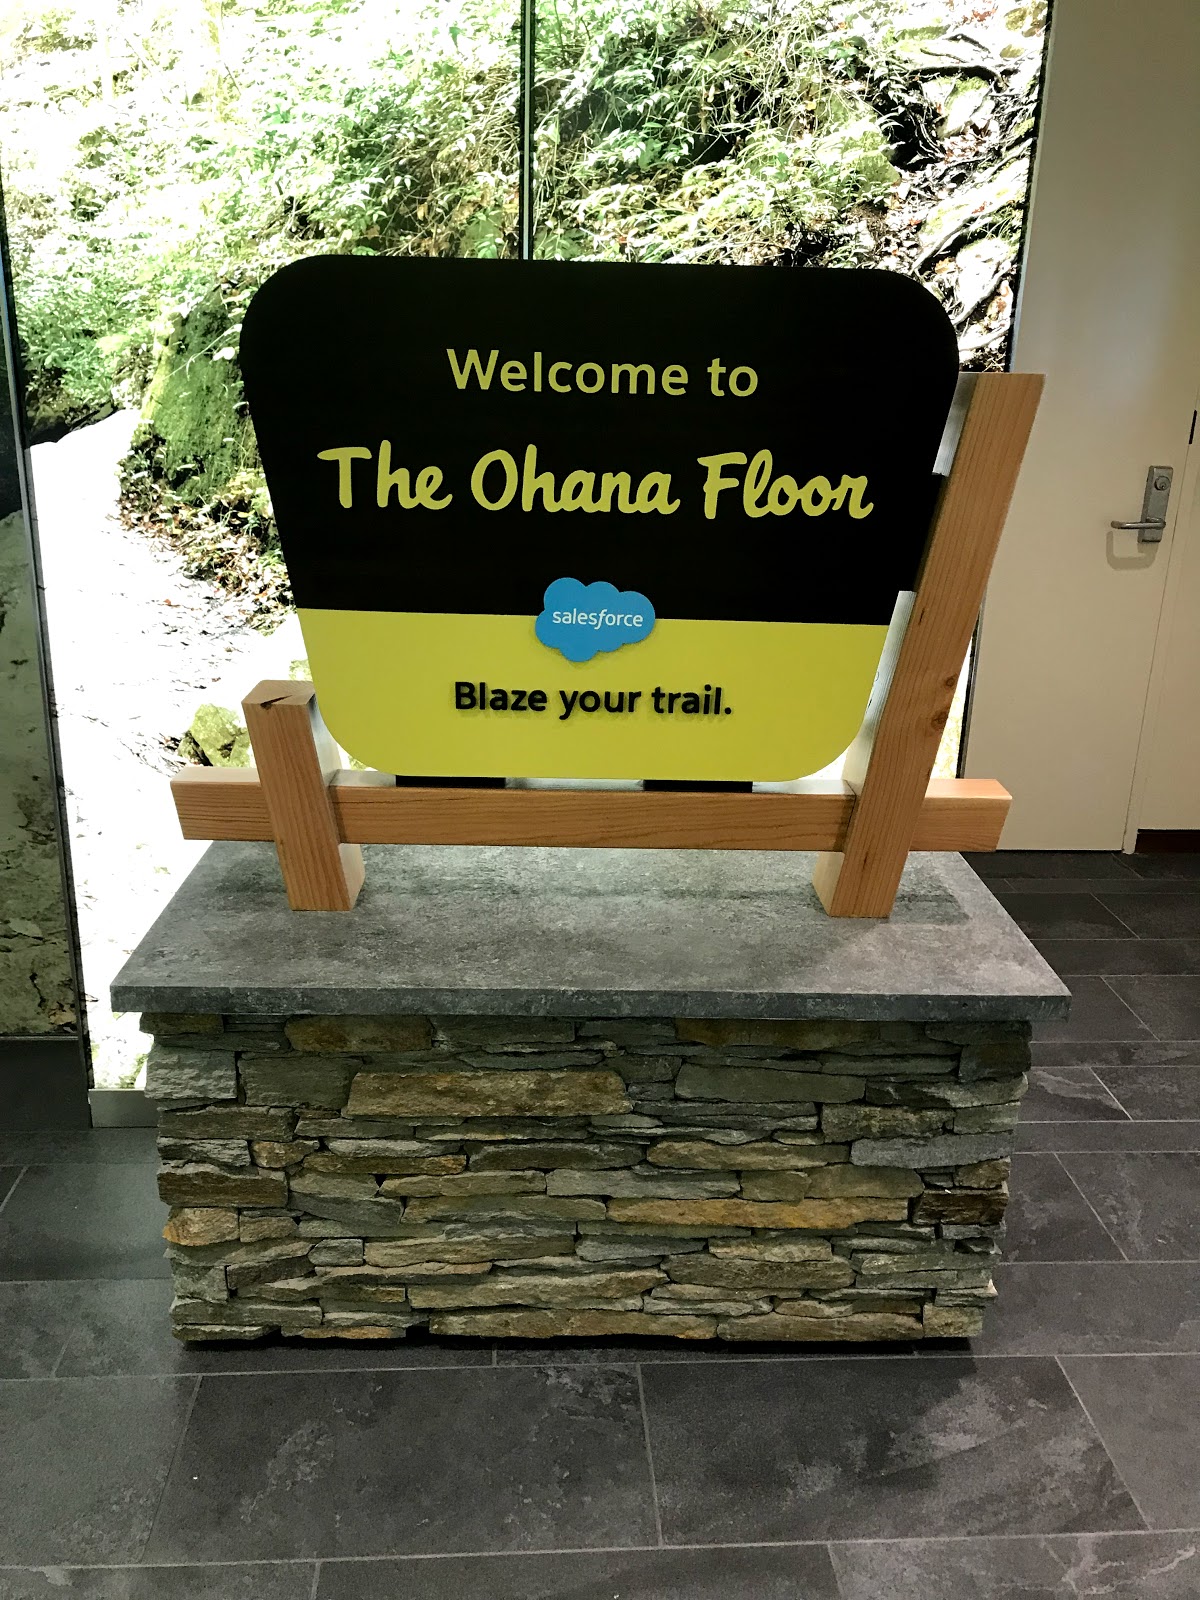 Tigh Loughhead at Salesforce Tower's Ohana Floor in New York City